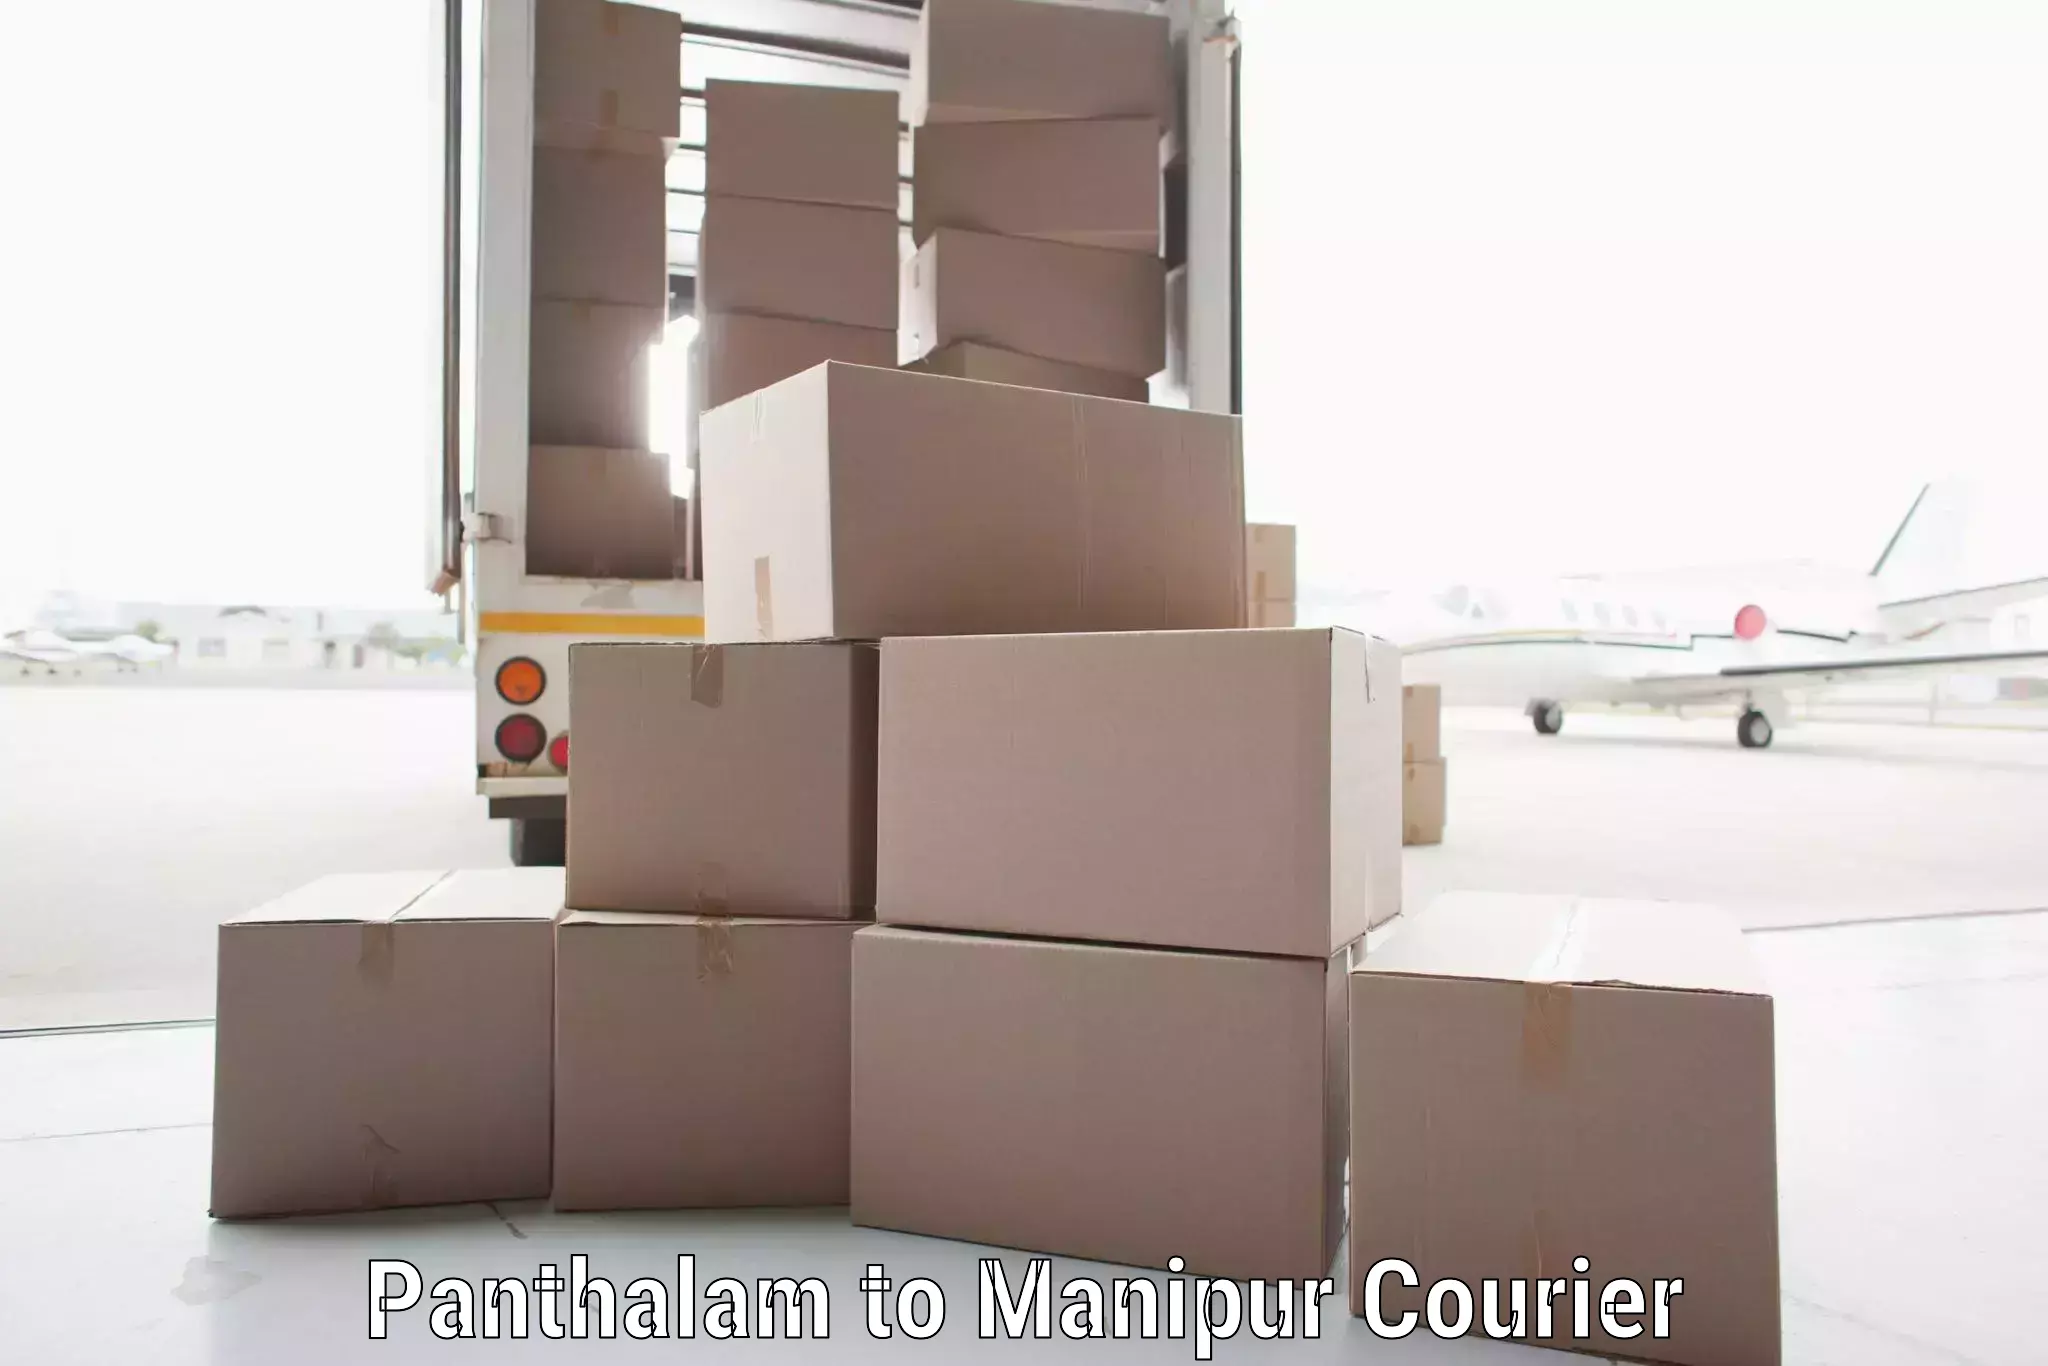 State-of-the-art courier technology Panthalam to Senapati